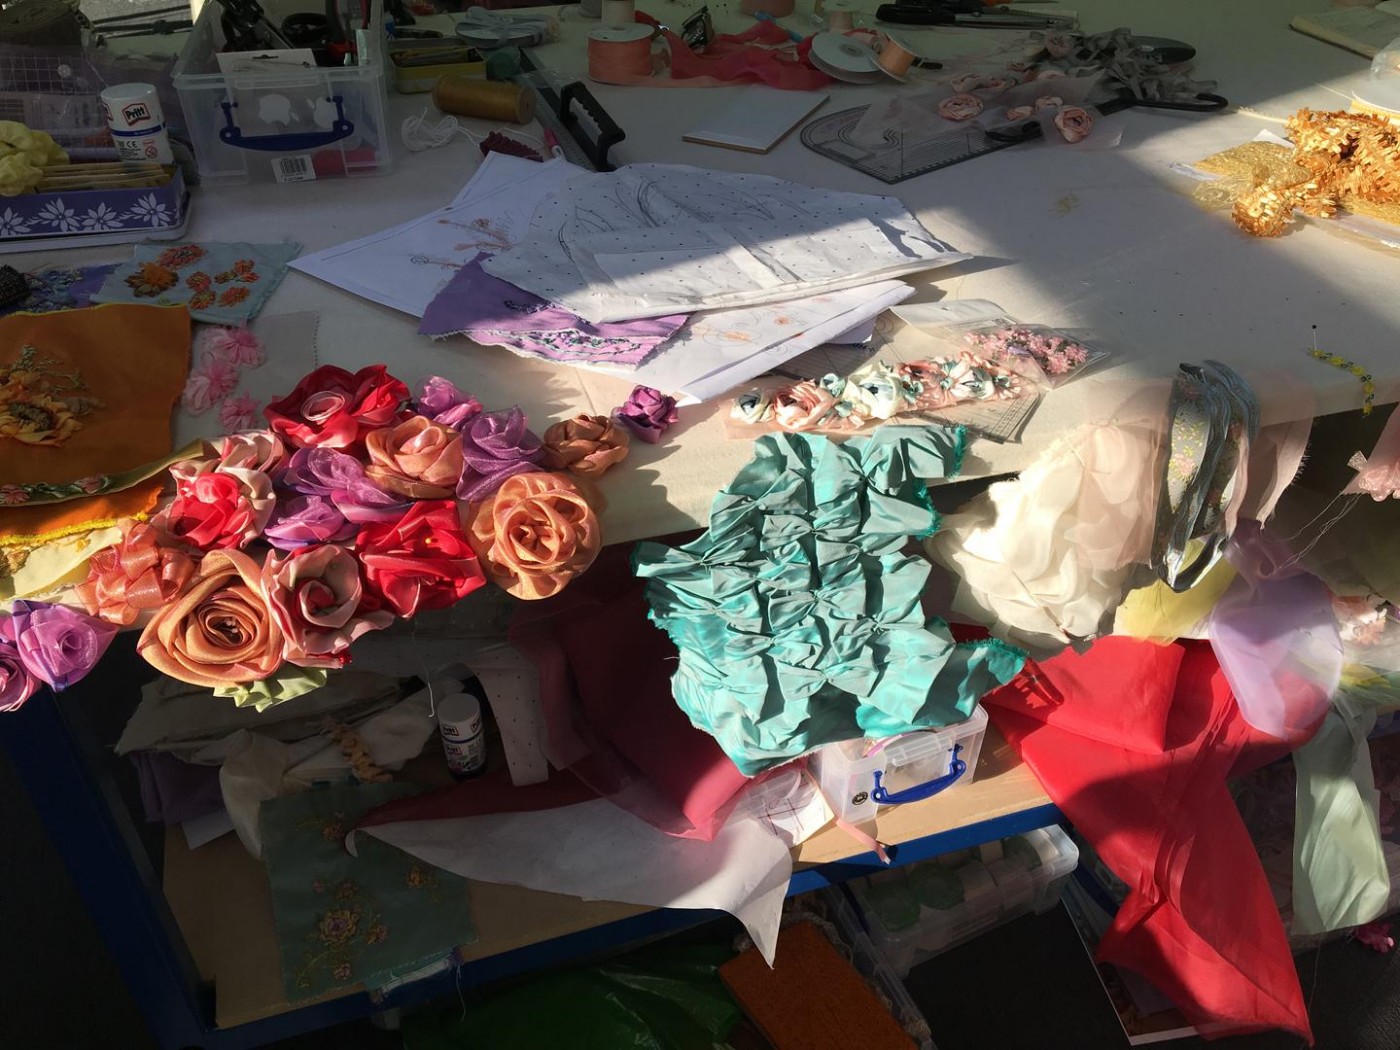 Behind the scenes fabric flowers. Credit: Netflix 2020.